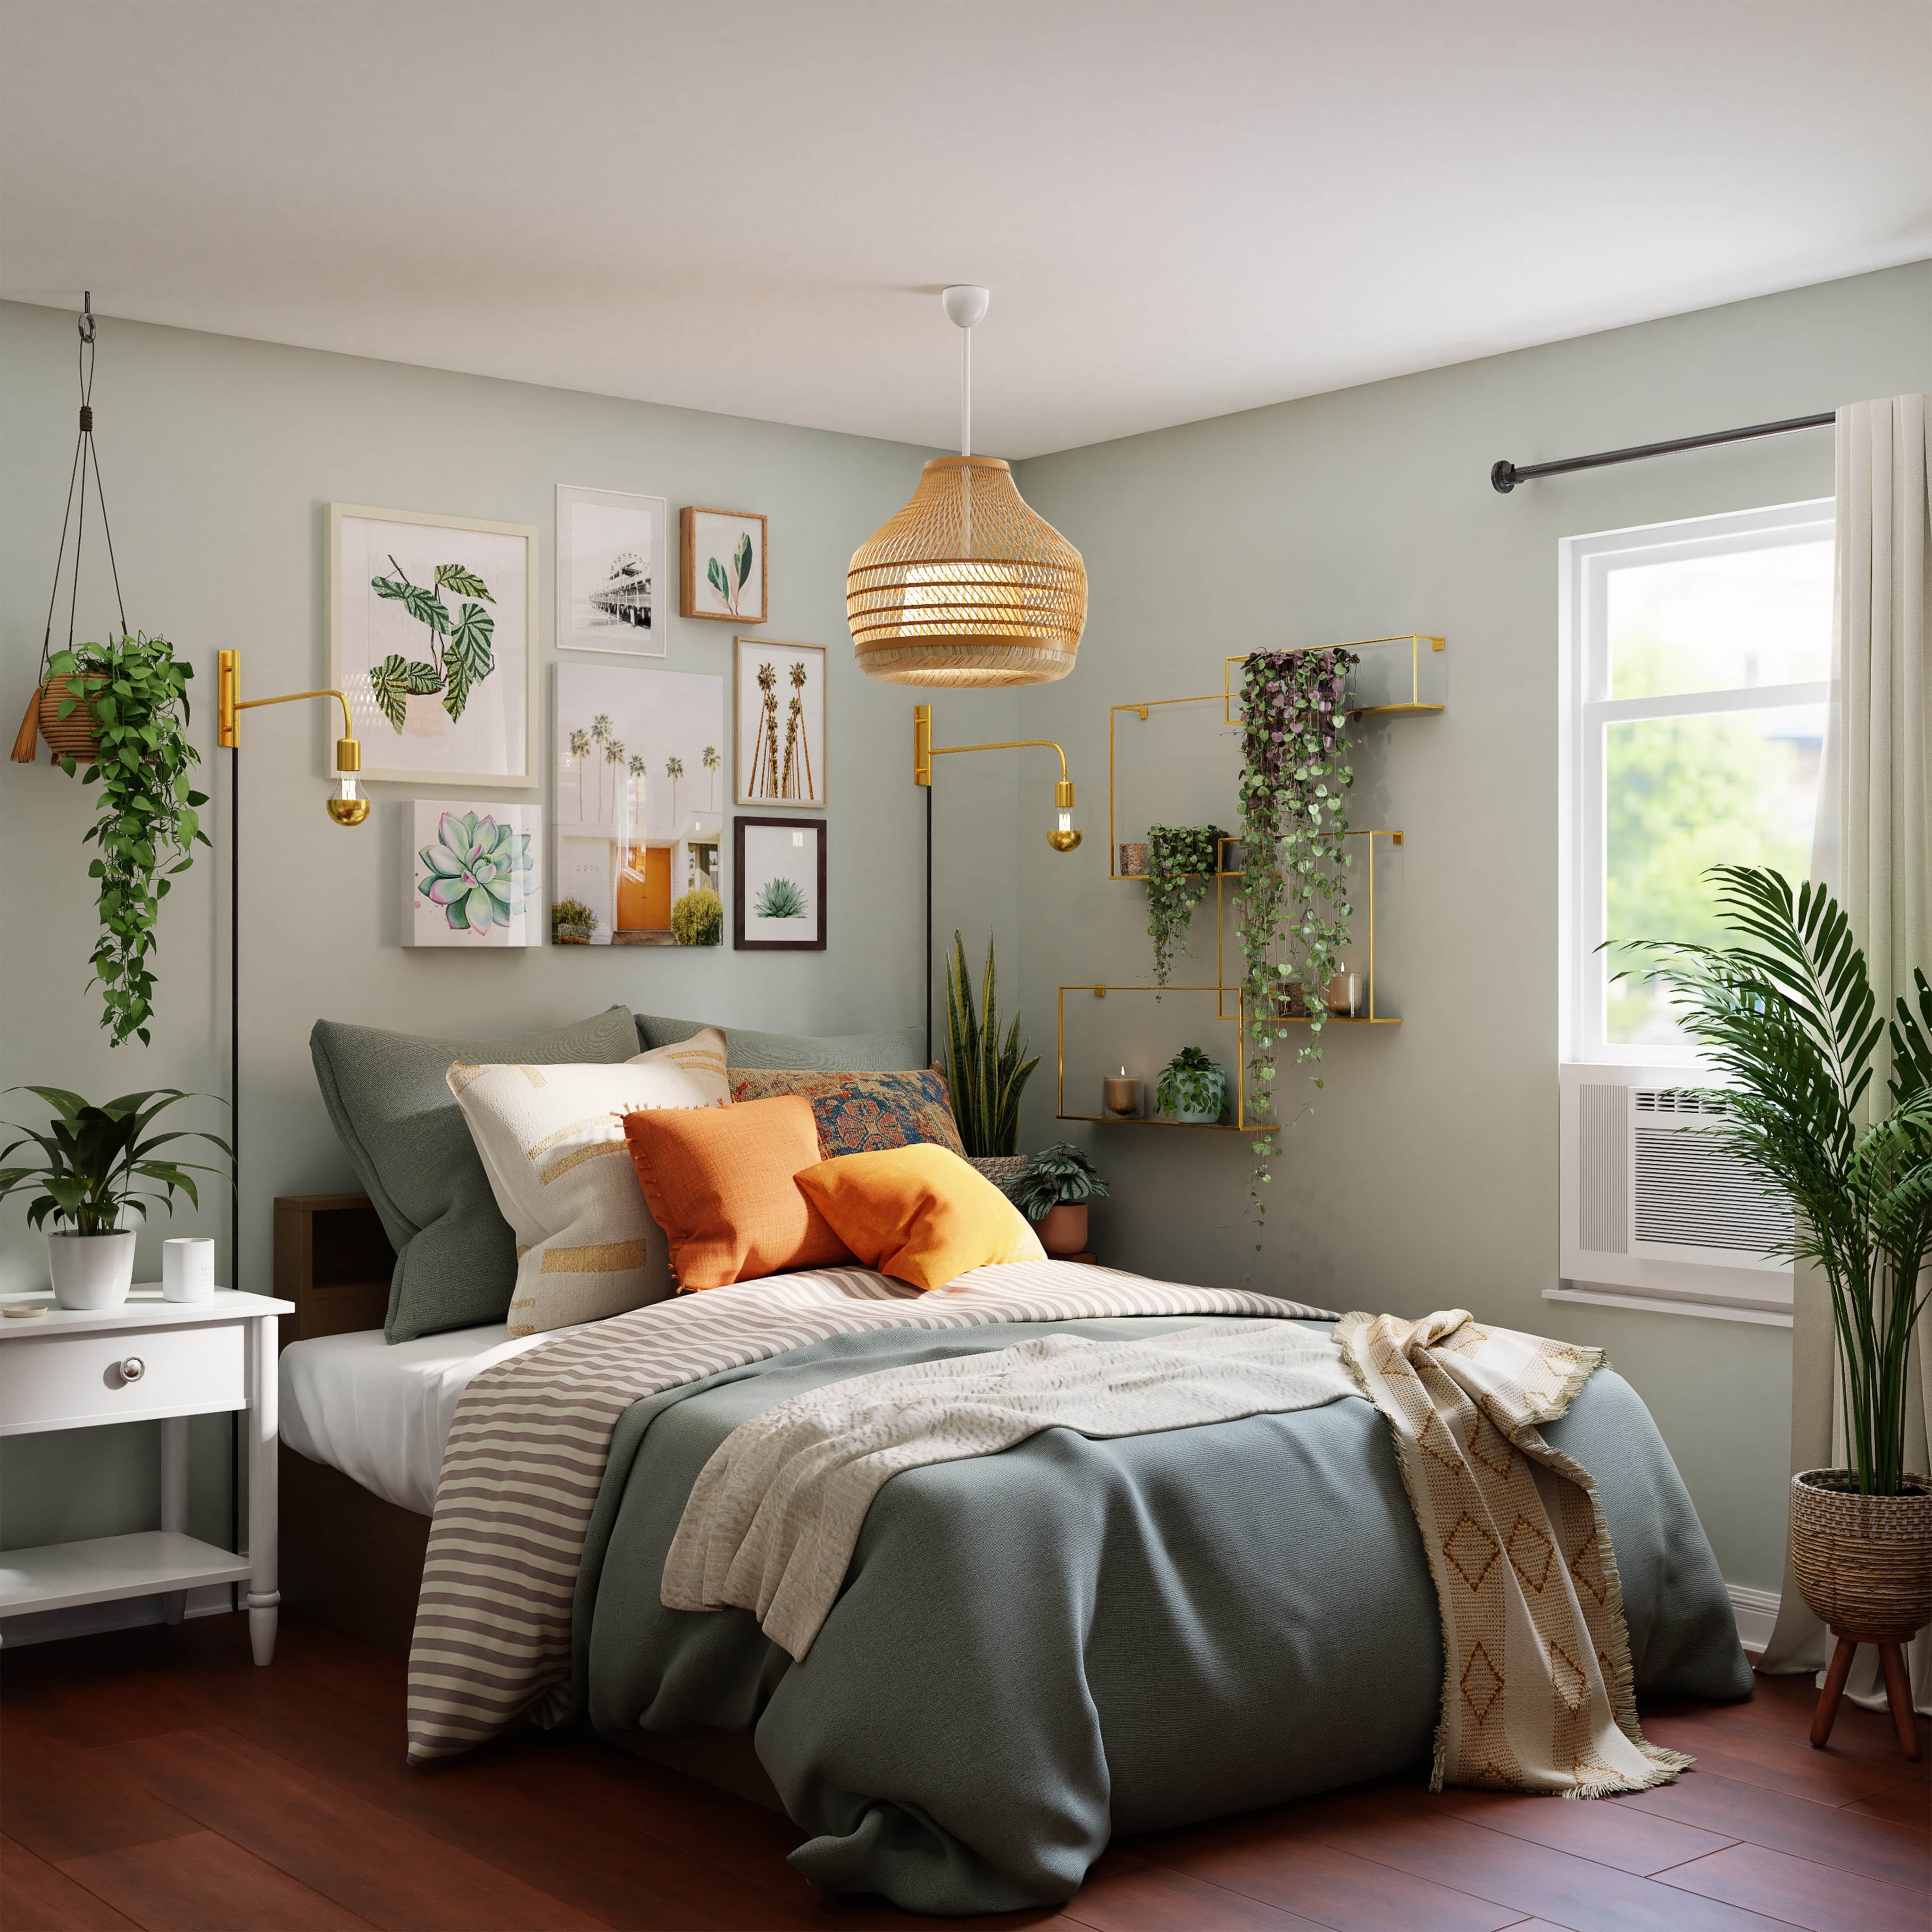 Small bedroom with lots of plants, stock image.